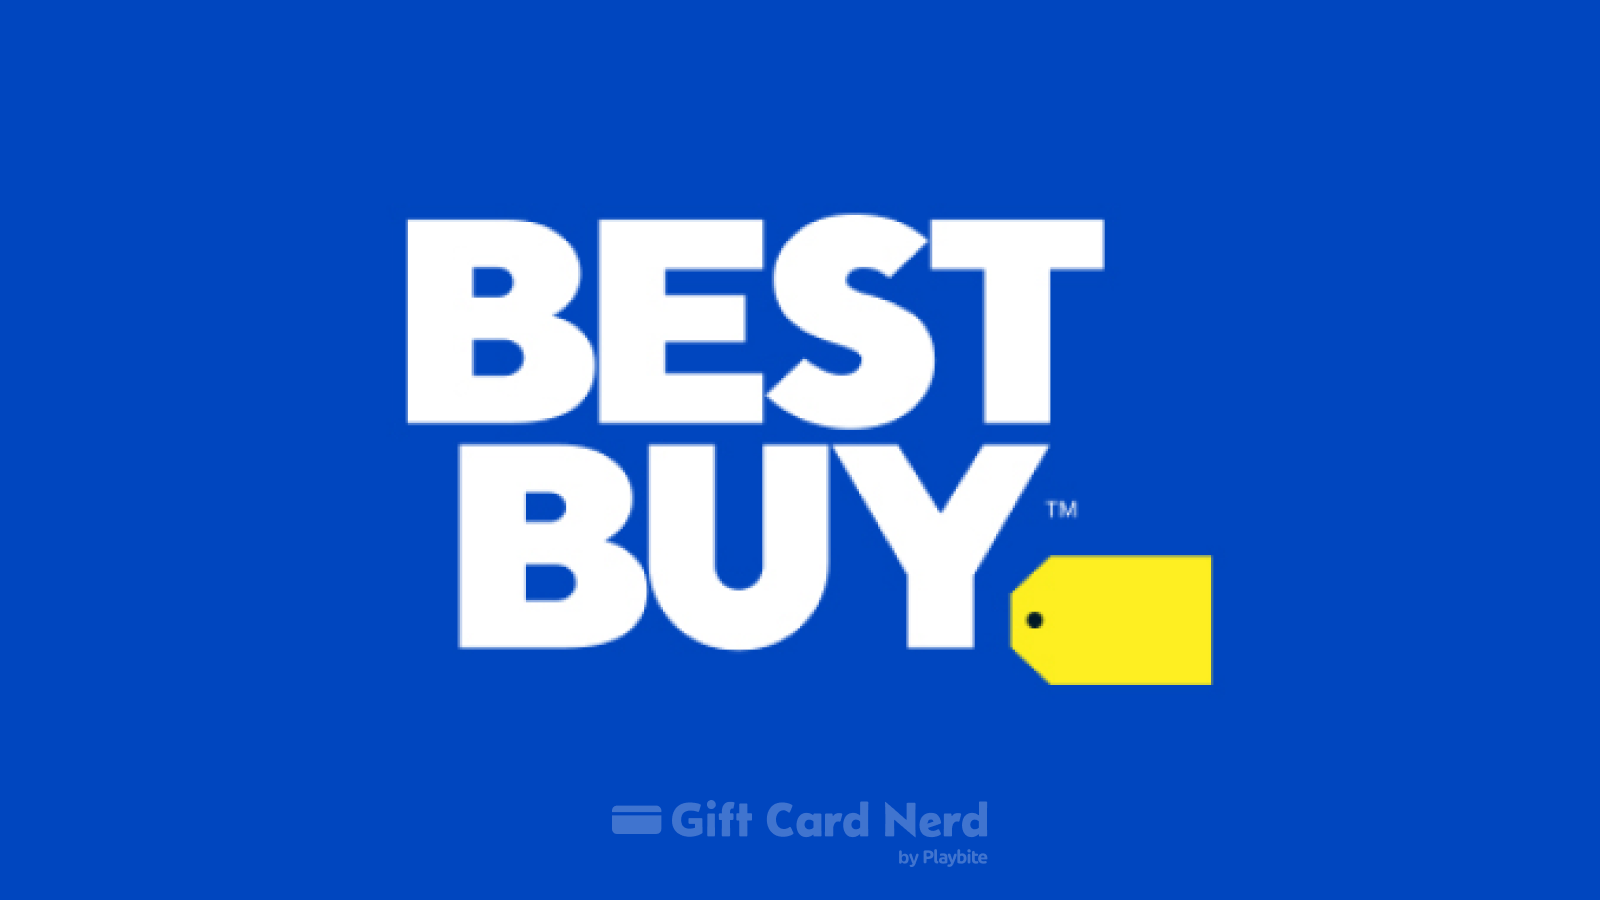 Can I Use a Best Buy Gift Card on Apple Wallet?